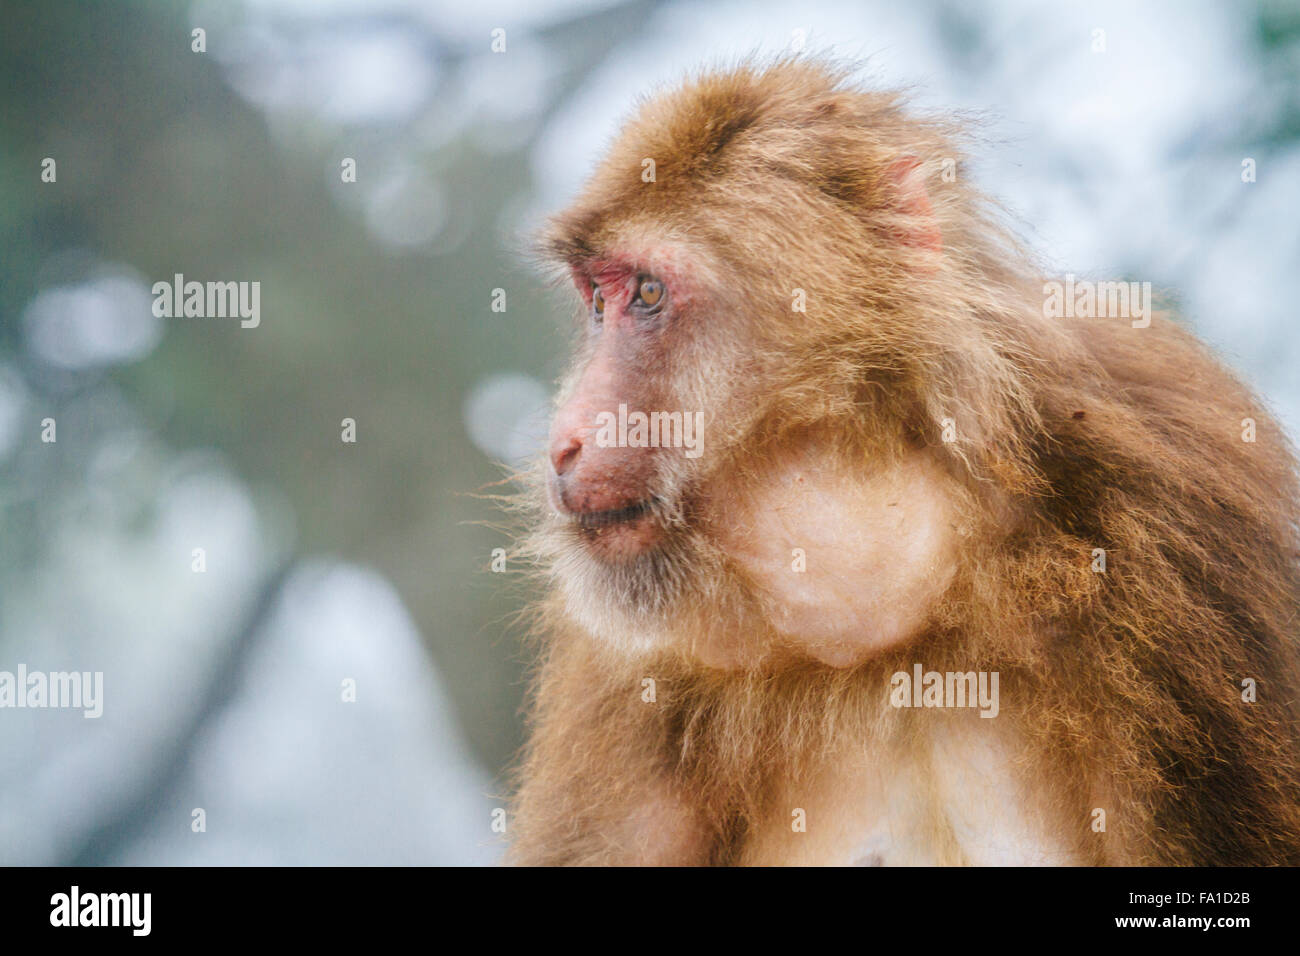 Mt.Emei, Sichuan province, China - Close up of the cute macaque in the wild. Stock Photo